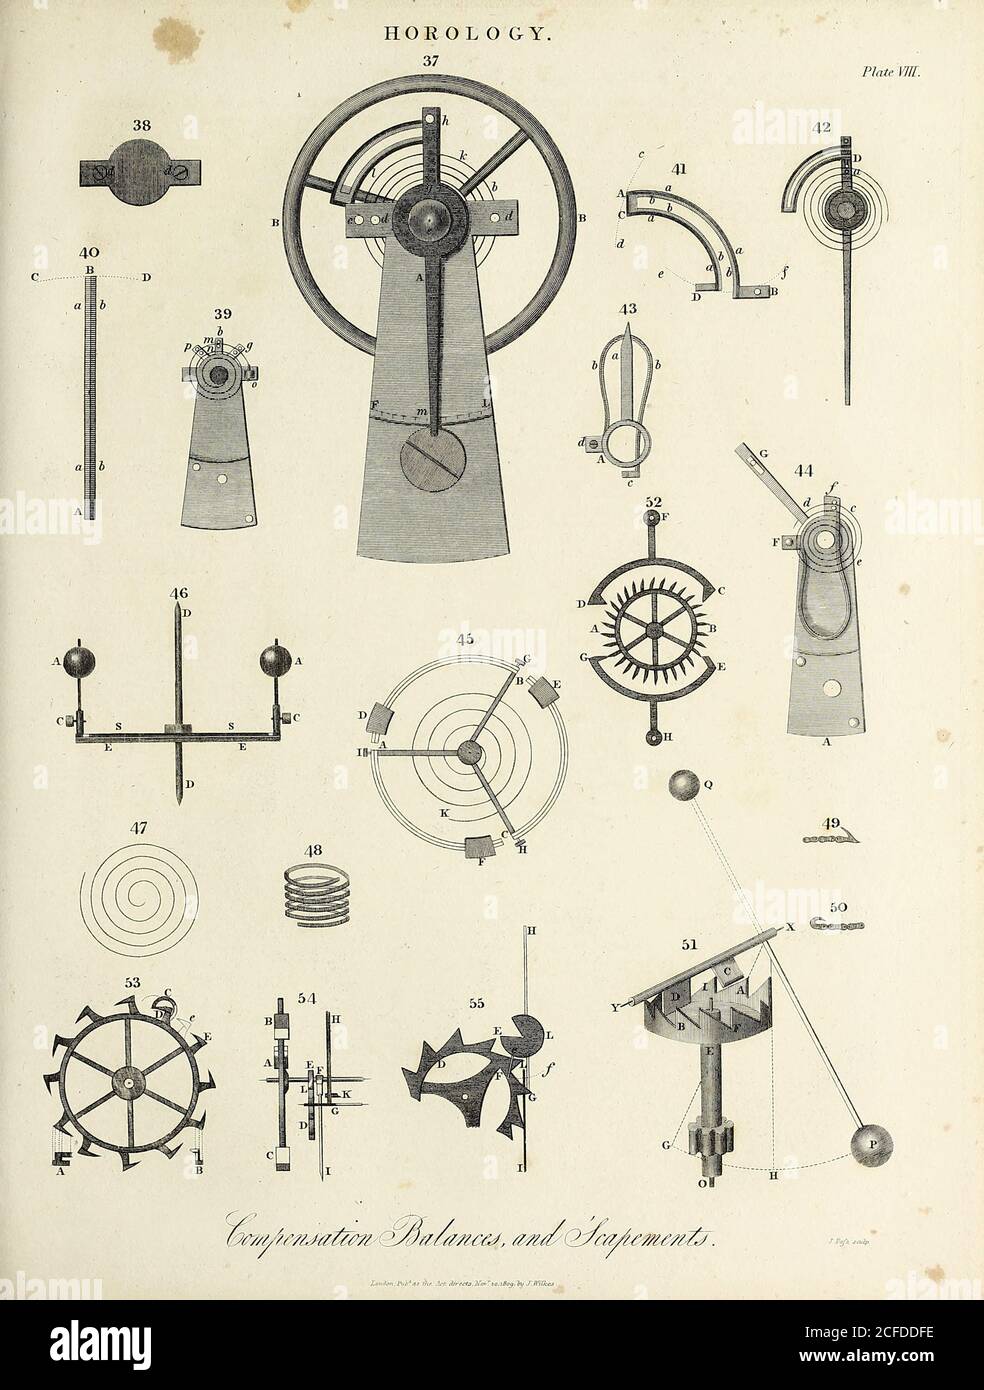 Clockwork mechanism Horology [study of the measurement of time. Clocks, watches, clockwork, sundials, hourglasses, clepsydras, timers, time recorders, marine chronometers]. Copperplate engraving By J. Pafs From the Encyclopaedia Londinensis or, Universal dictionary of arts, sciences, and literature; Volume X;  Edited by Wilkes, John. Published in London in 1811 Stock Photo